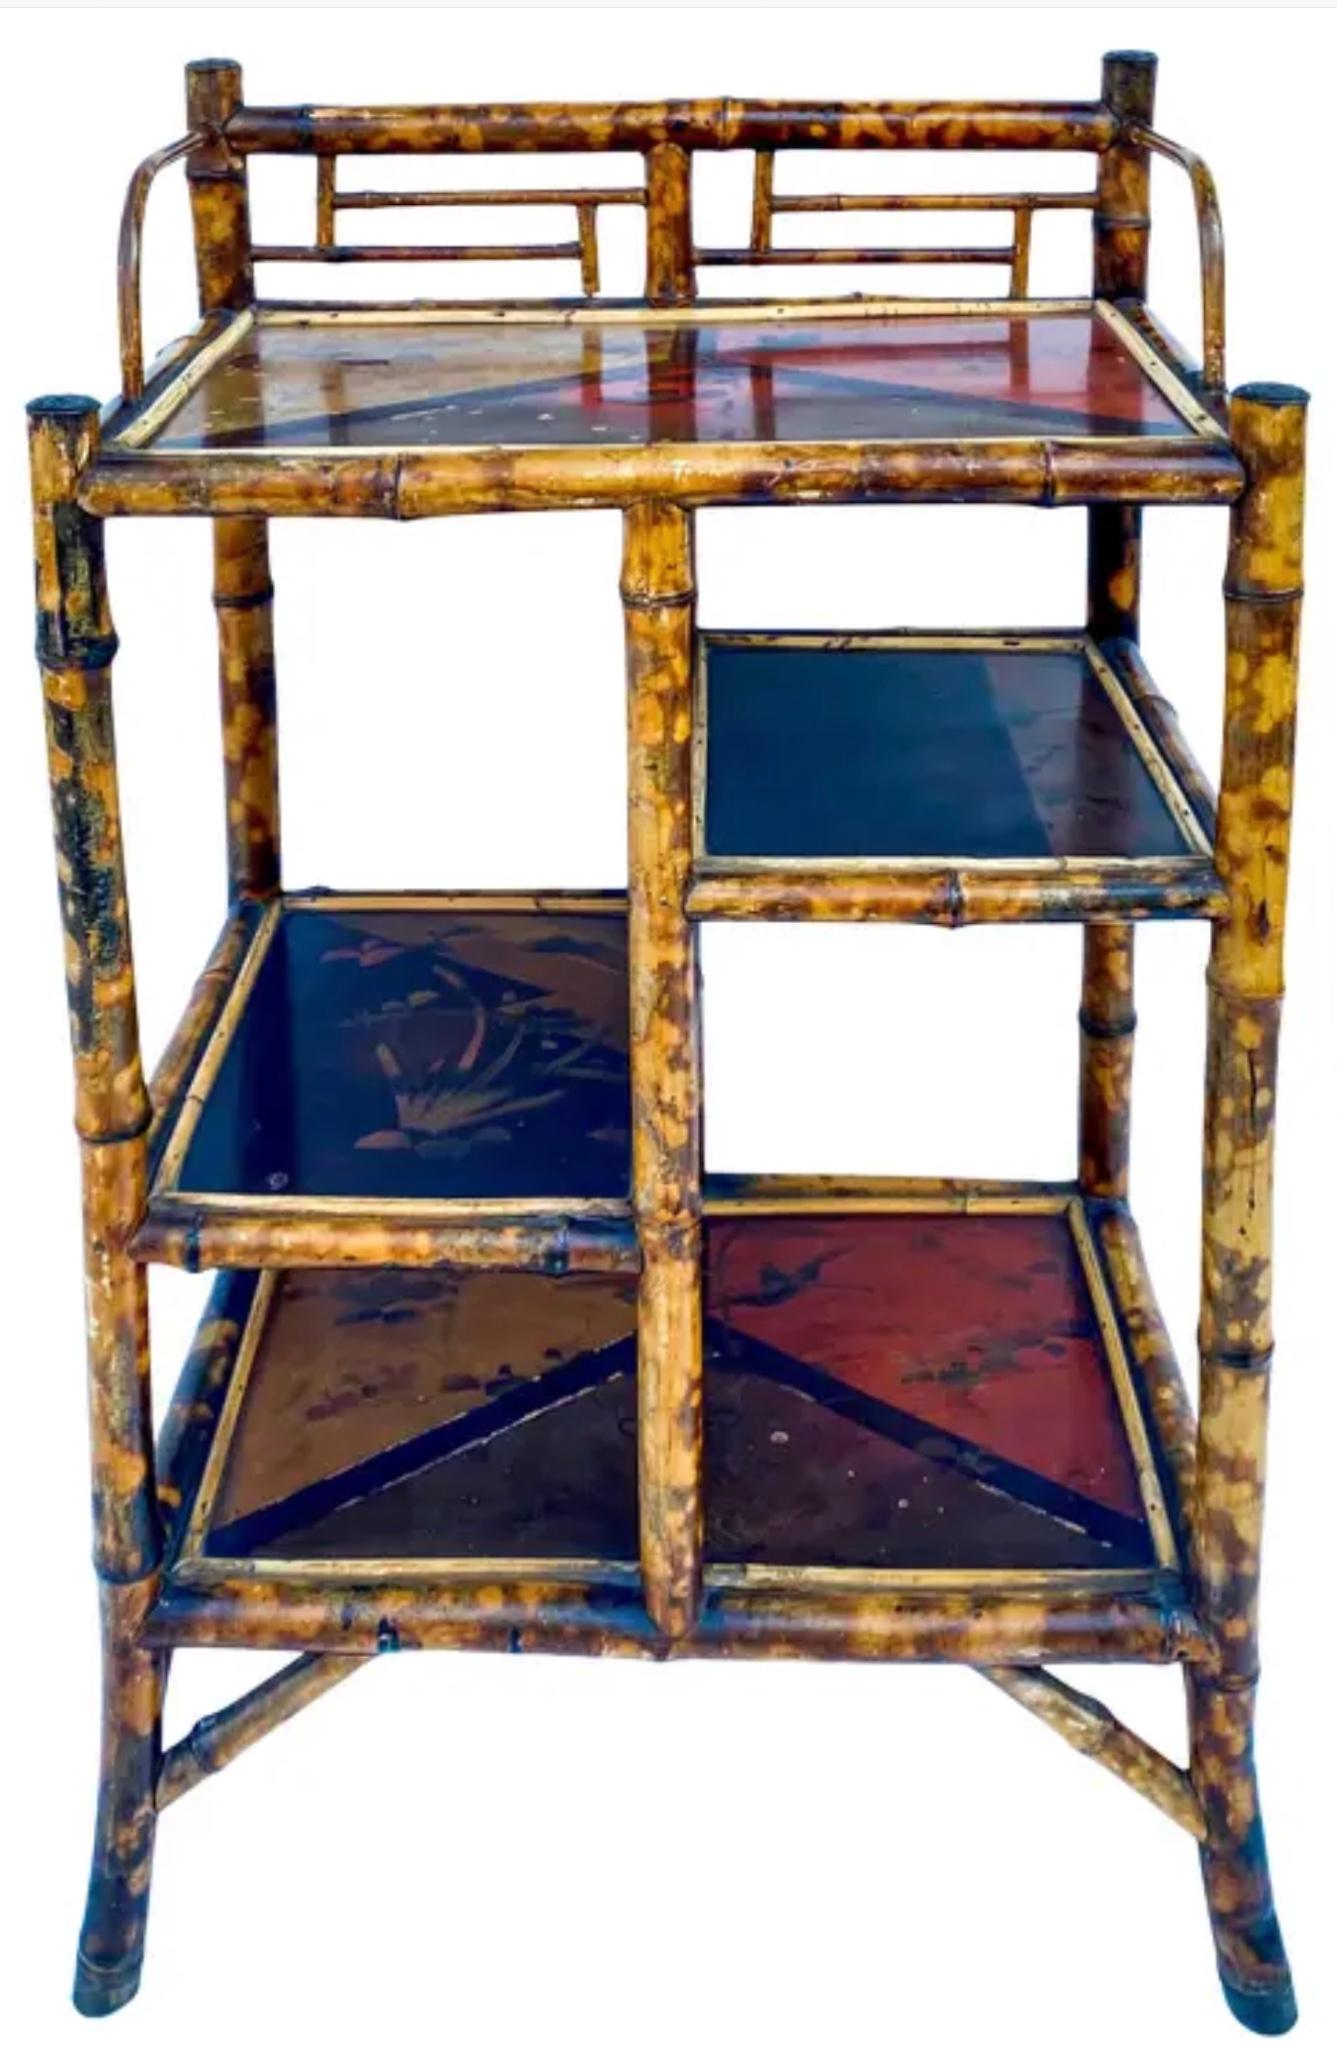 19th-C. English Aesthetic Movement Lacquer & Burnt Bamboo Plant Stand / Shelf 1